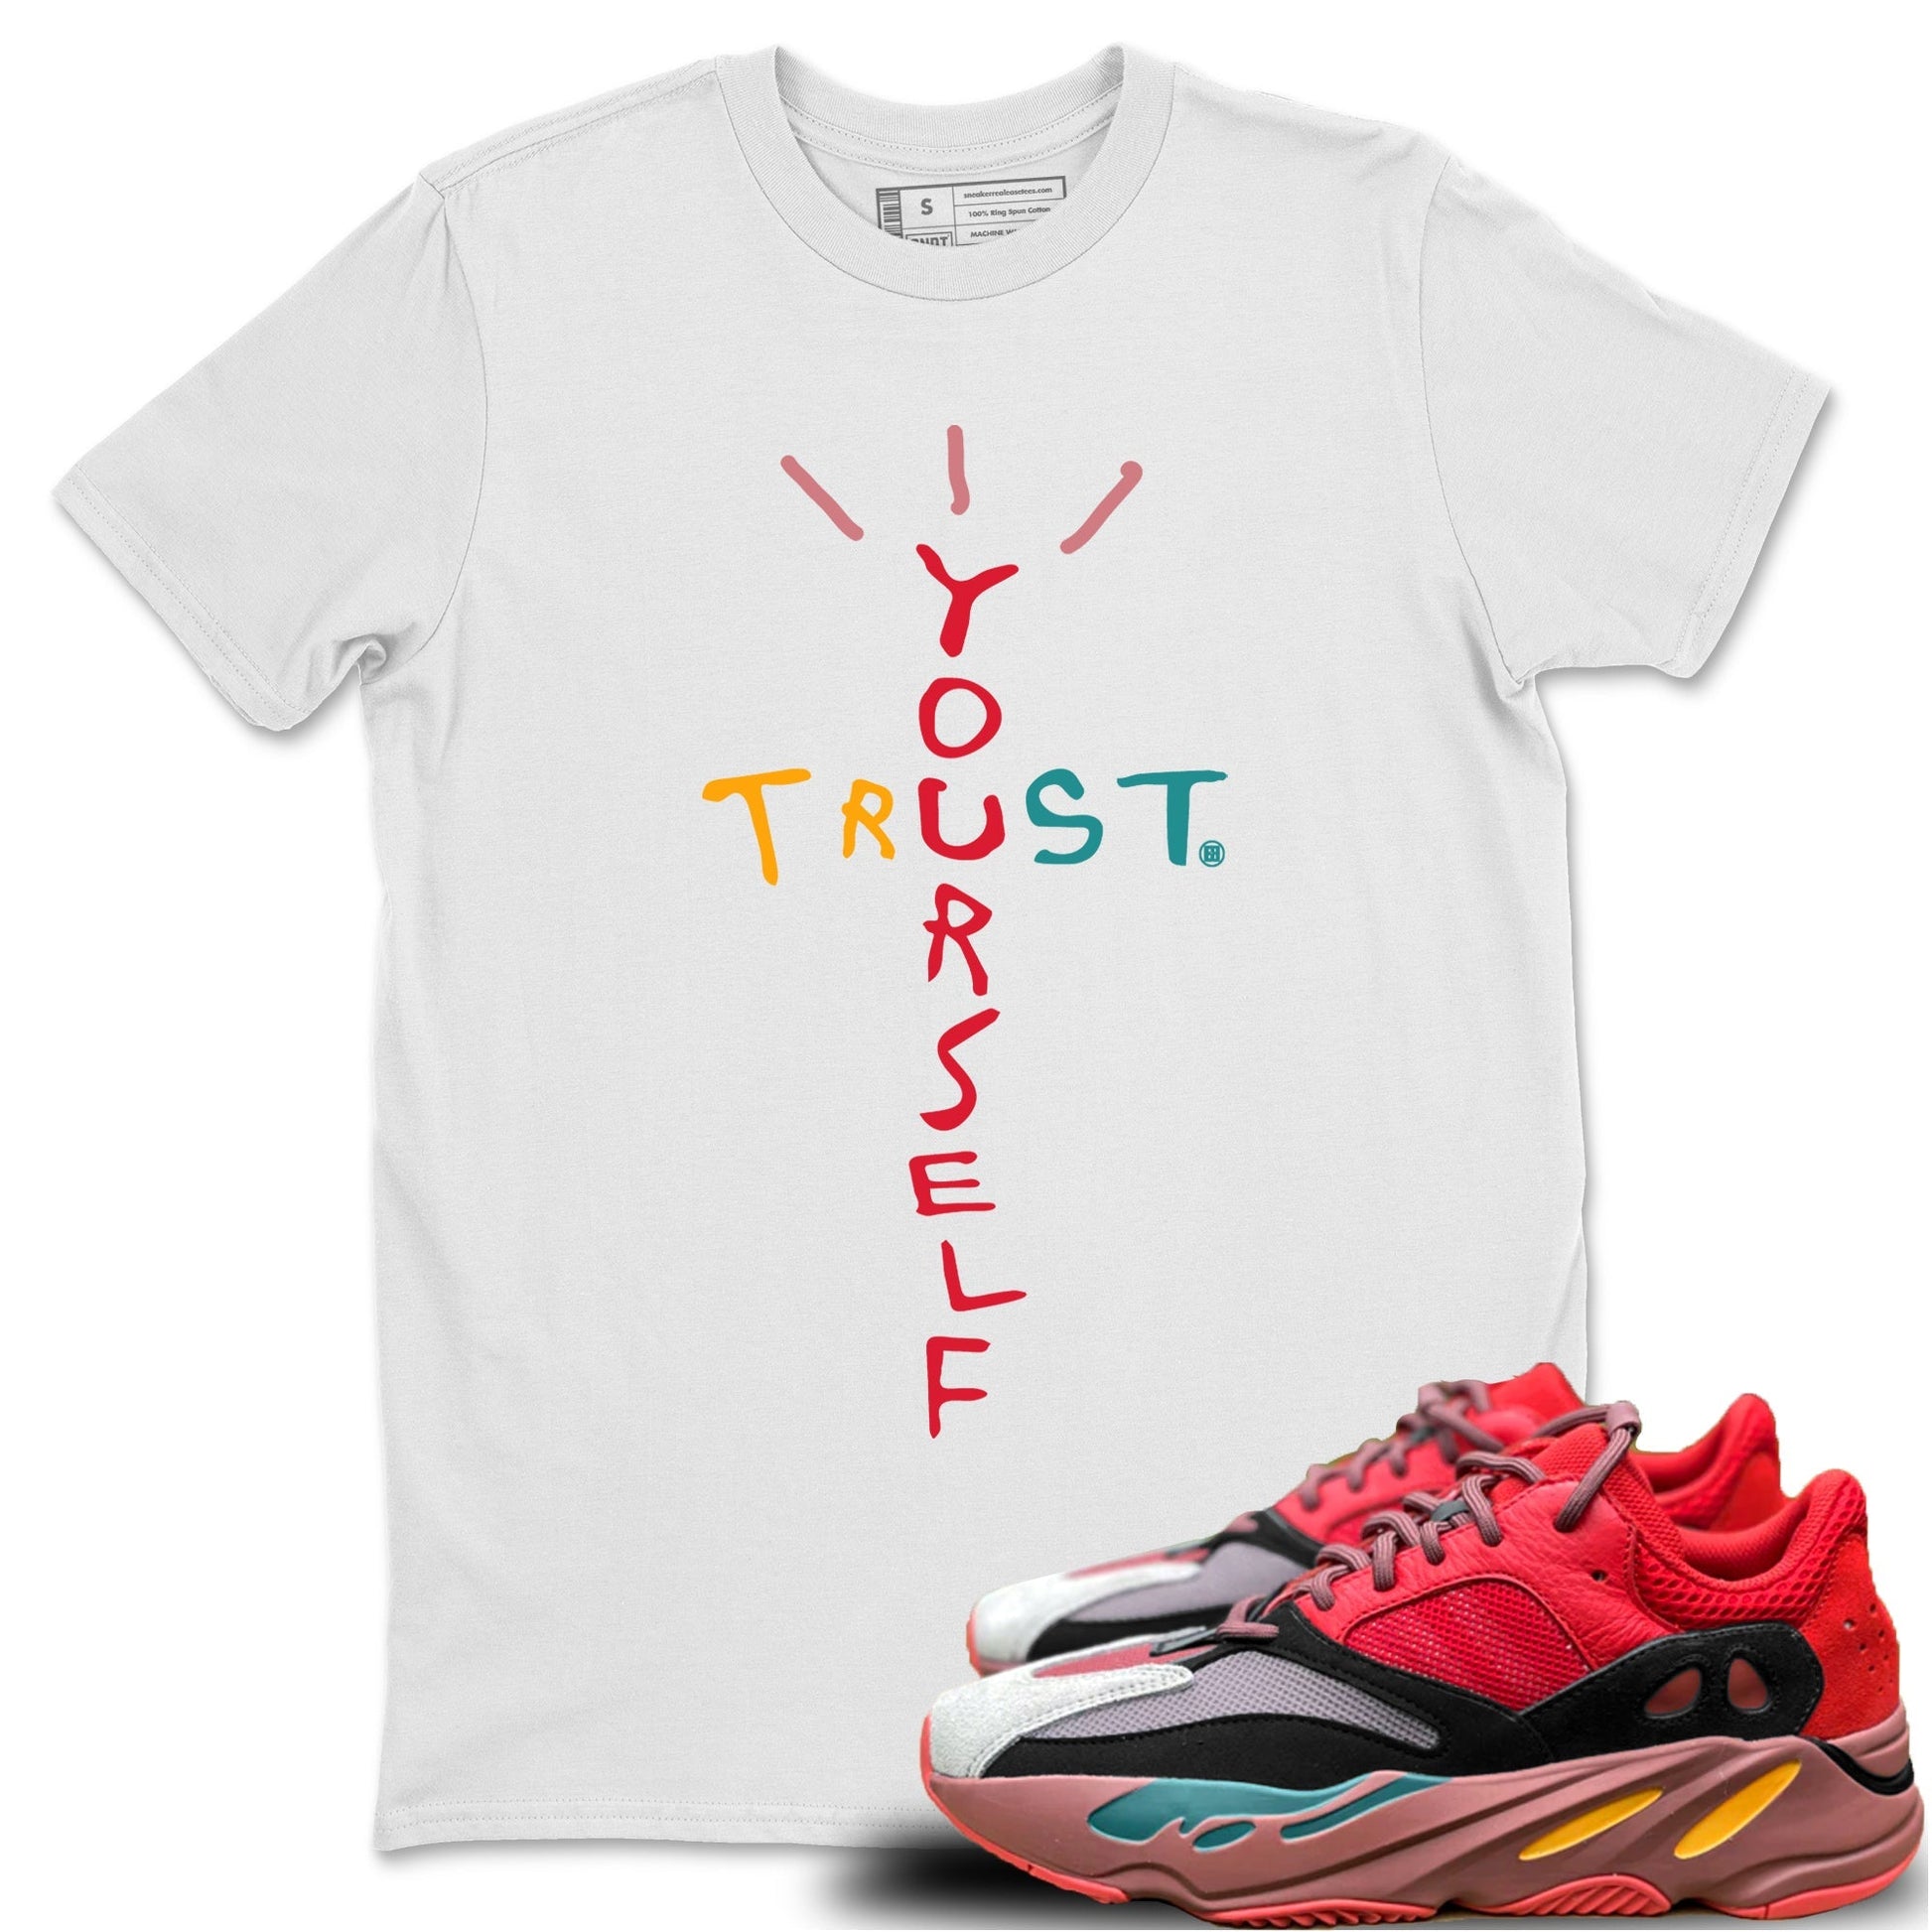 Yeezy 700 Hi-Res Red Sneaker Match Tees Trust Yourself Sneaker Tees Yeezy 700 Hi-Res Red Sneaker Release Tees Unisex Shirts